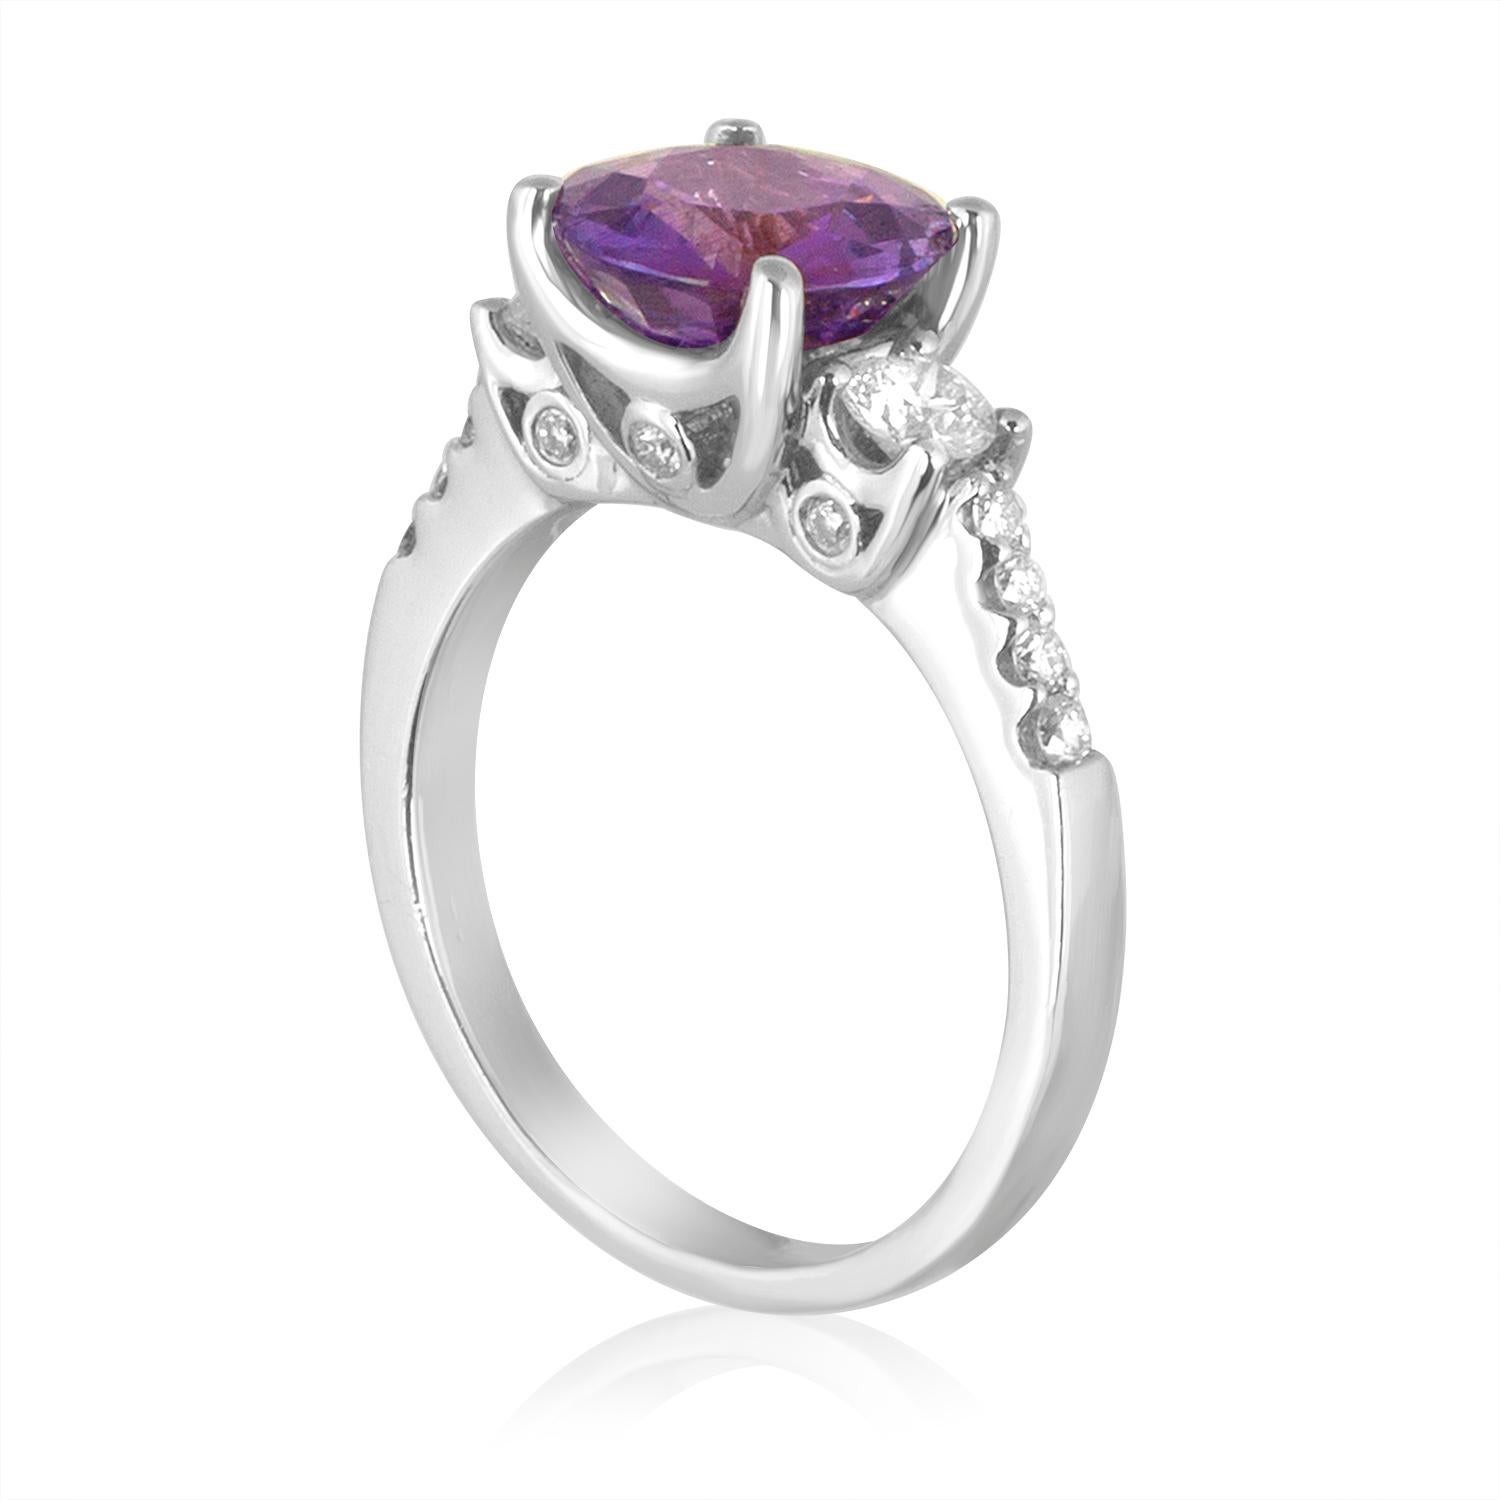 Beautiful Violet Purple Sapphire
The ring is 18K White Gold ring.
The center stone is 2.64 Carat Violetish Blue/Violet Sapphire
The Stone is Certified by LAPIS.
The stone is not heated and has natural color change.
The ring has 0.45 Ct in Diamonds